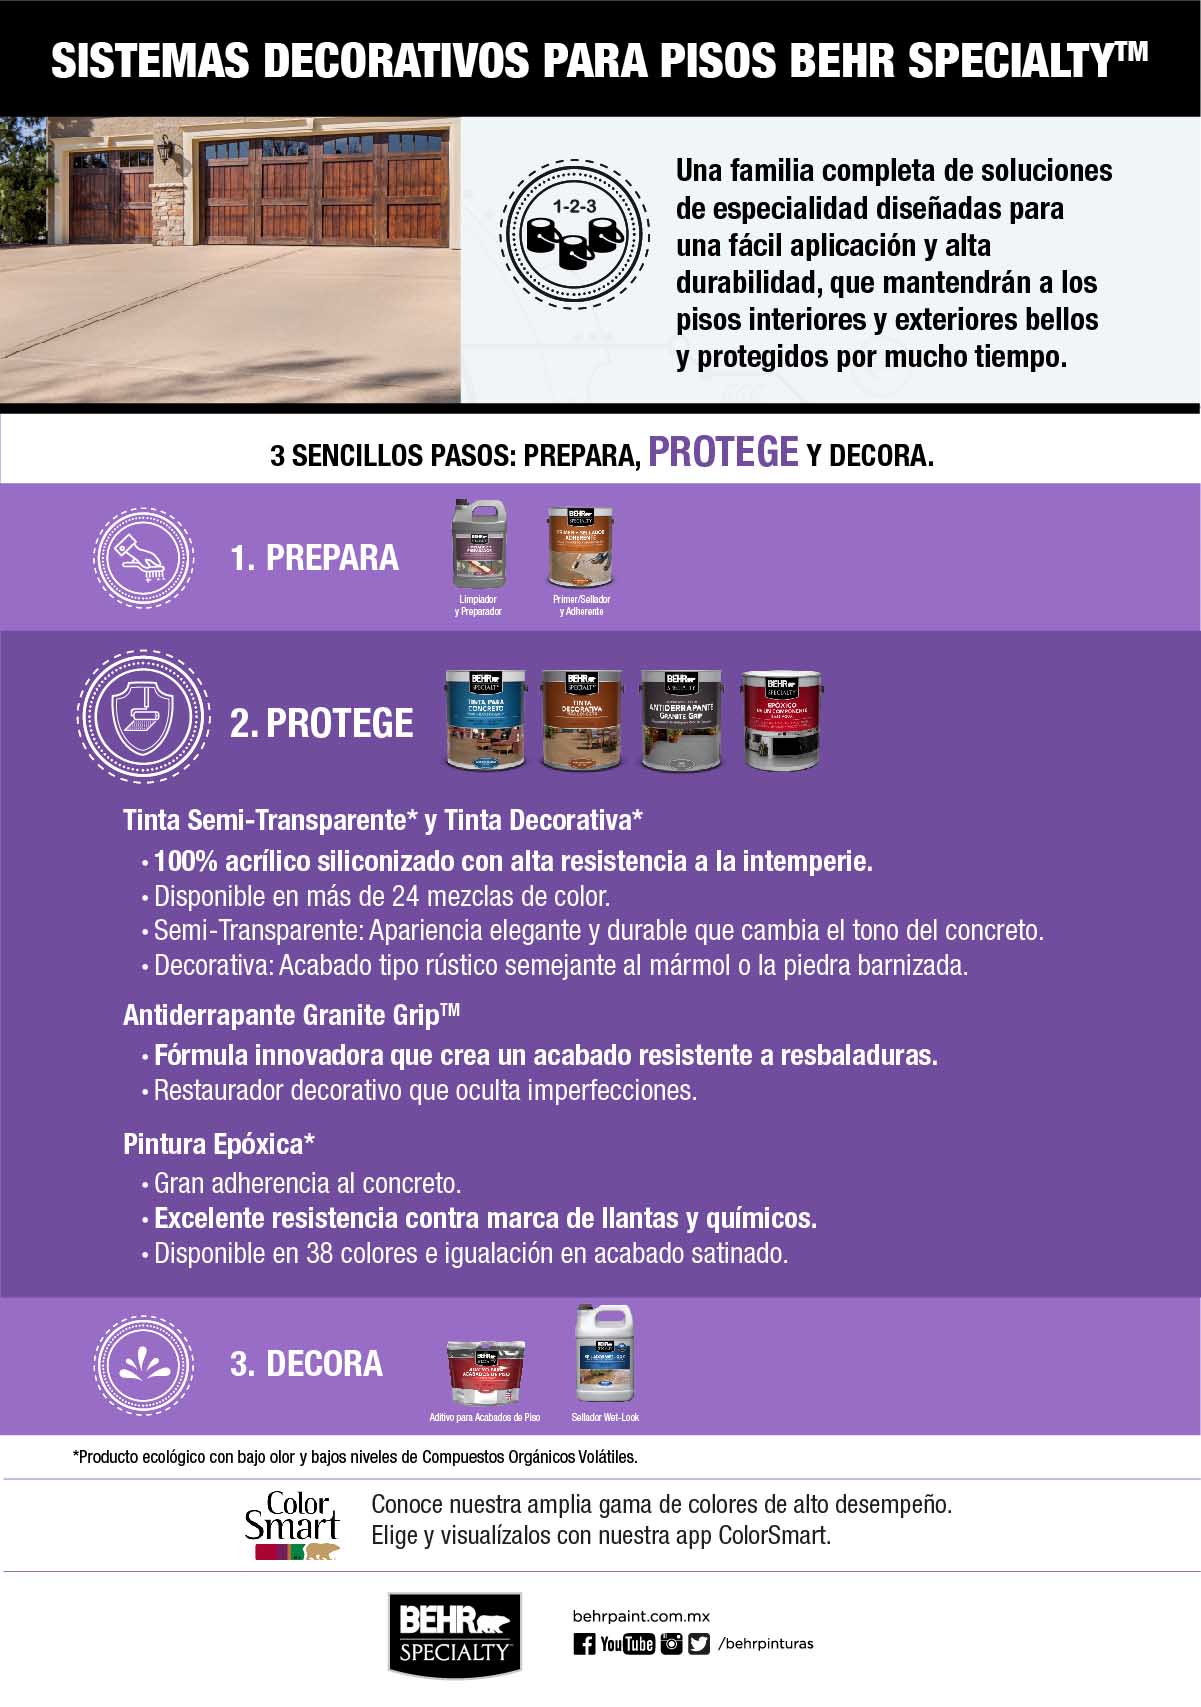 Behr Specialty Protege Home Depot México